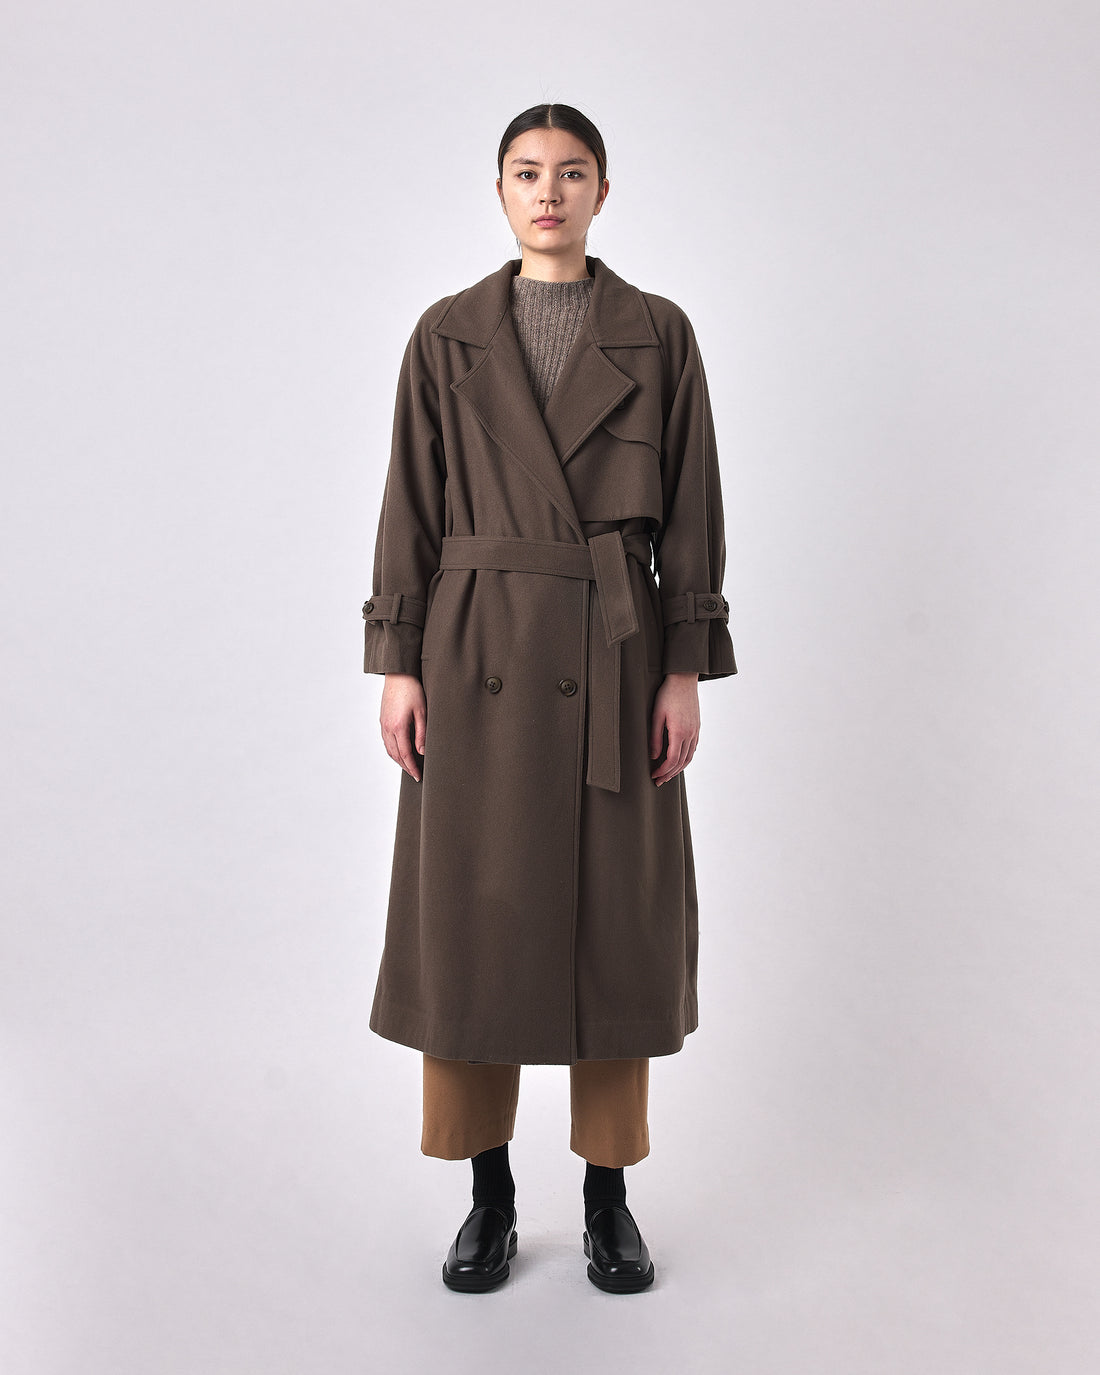 Fall Wool Trench - FW23 - Umber